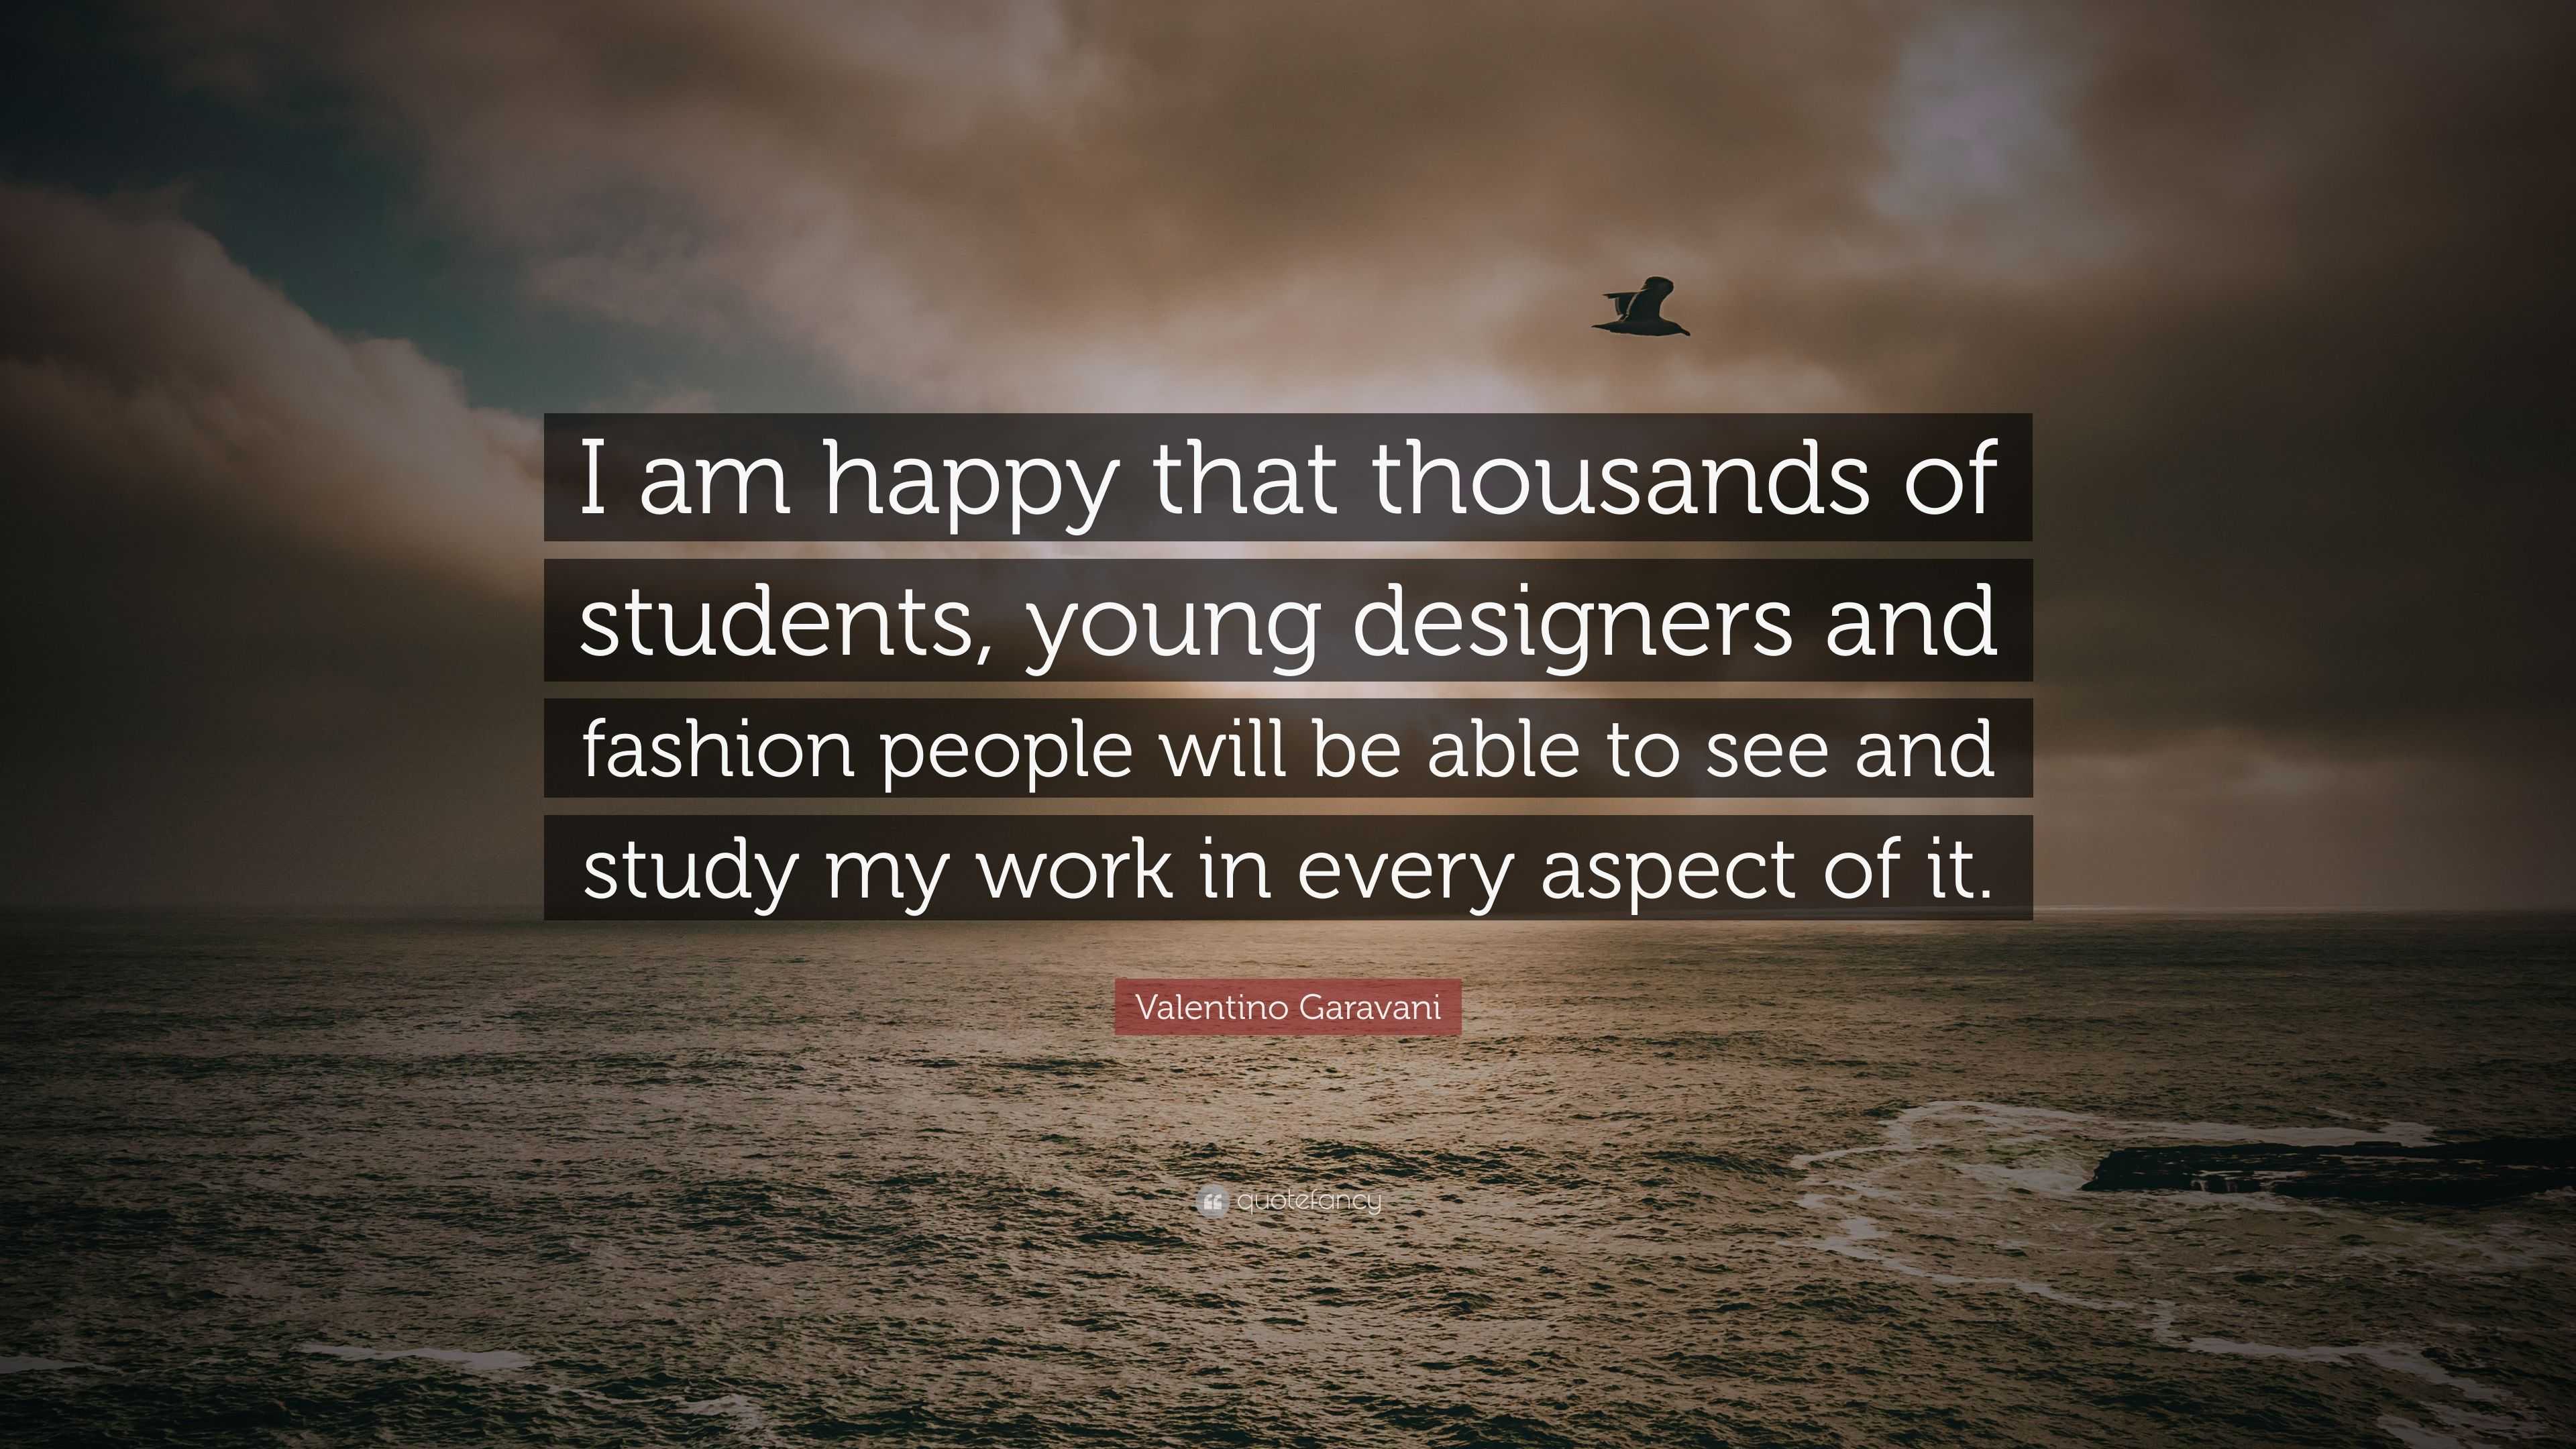 Valentino Garavani Quote: “I am that thousands of students, designers and fashion people will be able to see my work in every...”